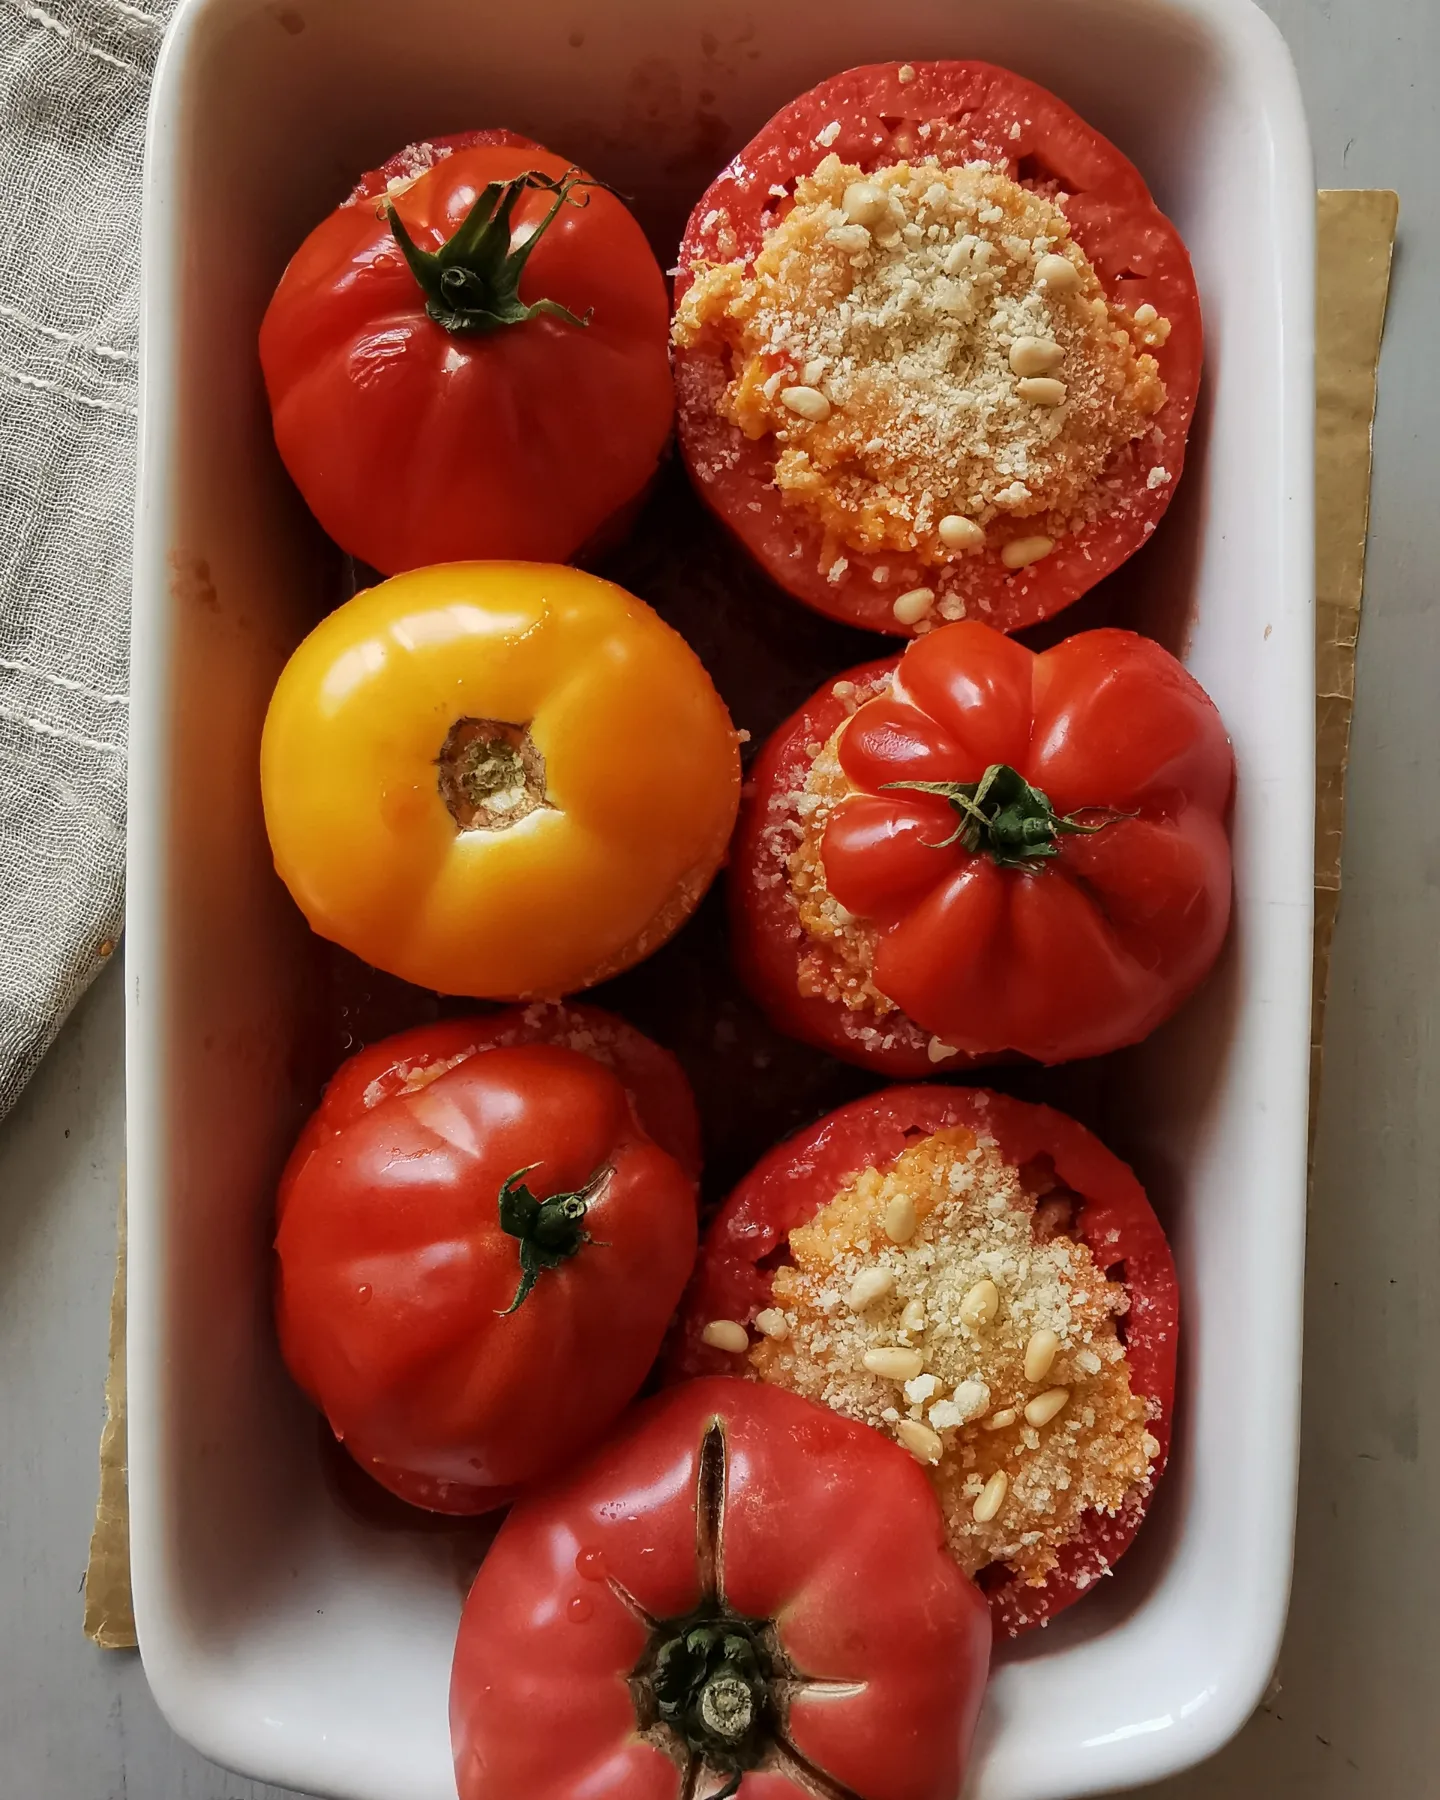 Millet stuffed tomatoes